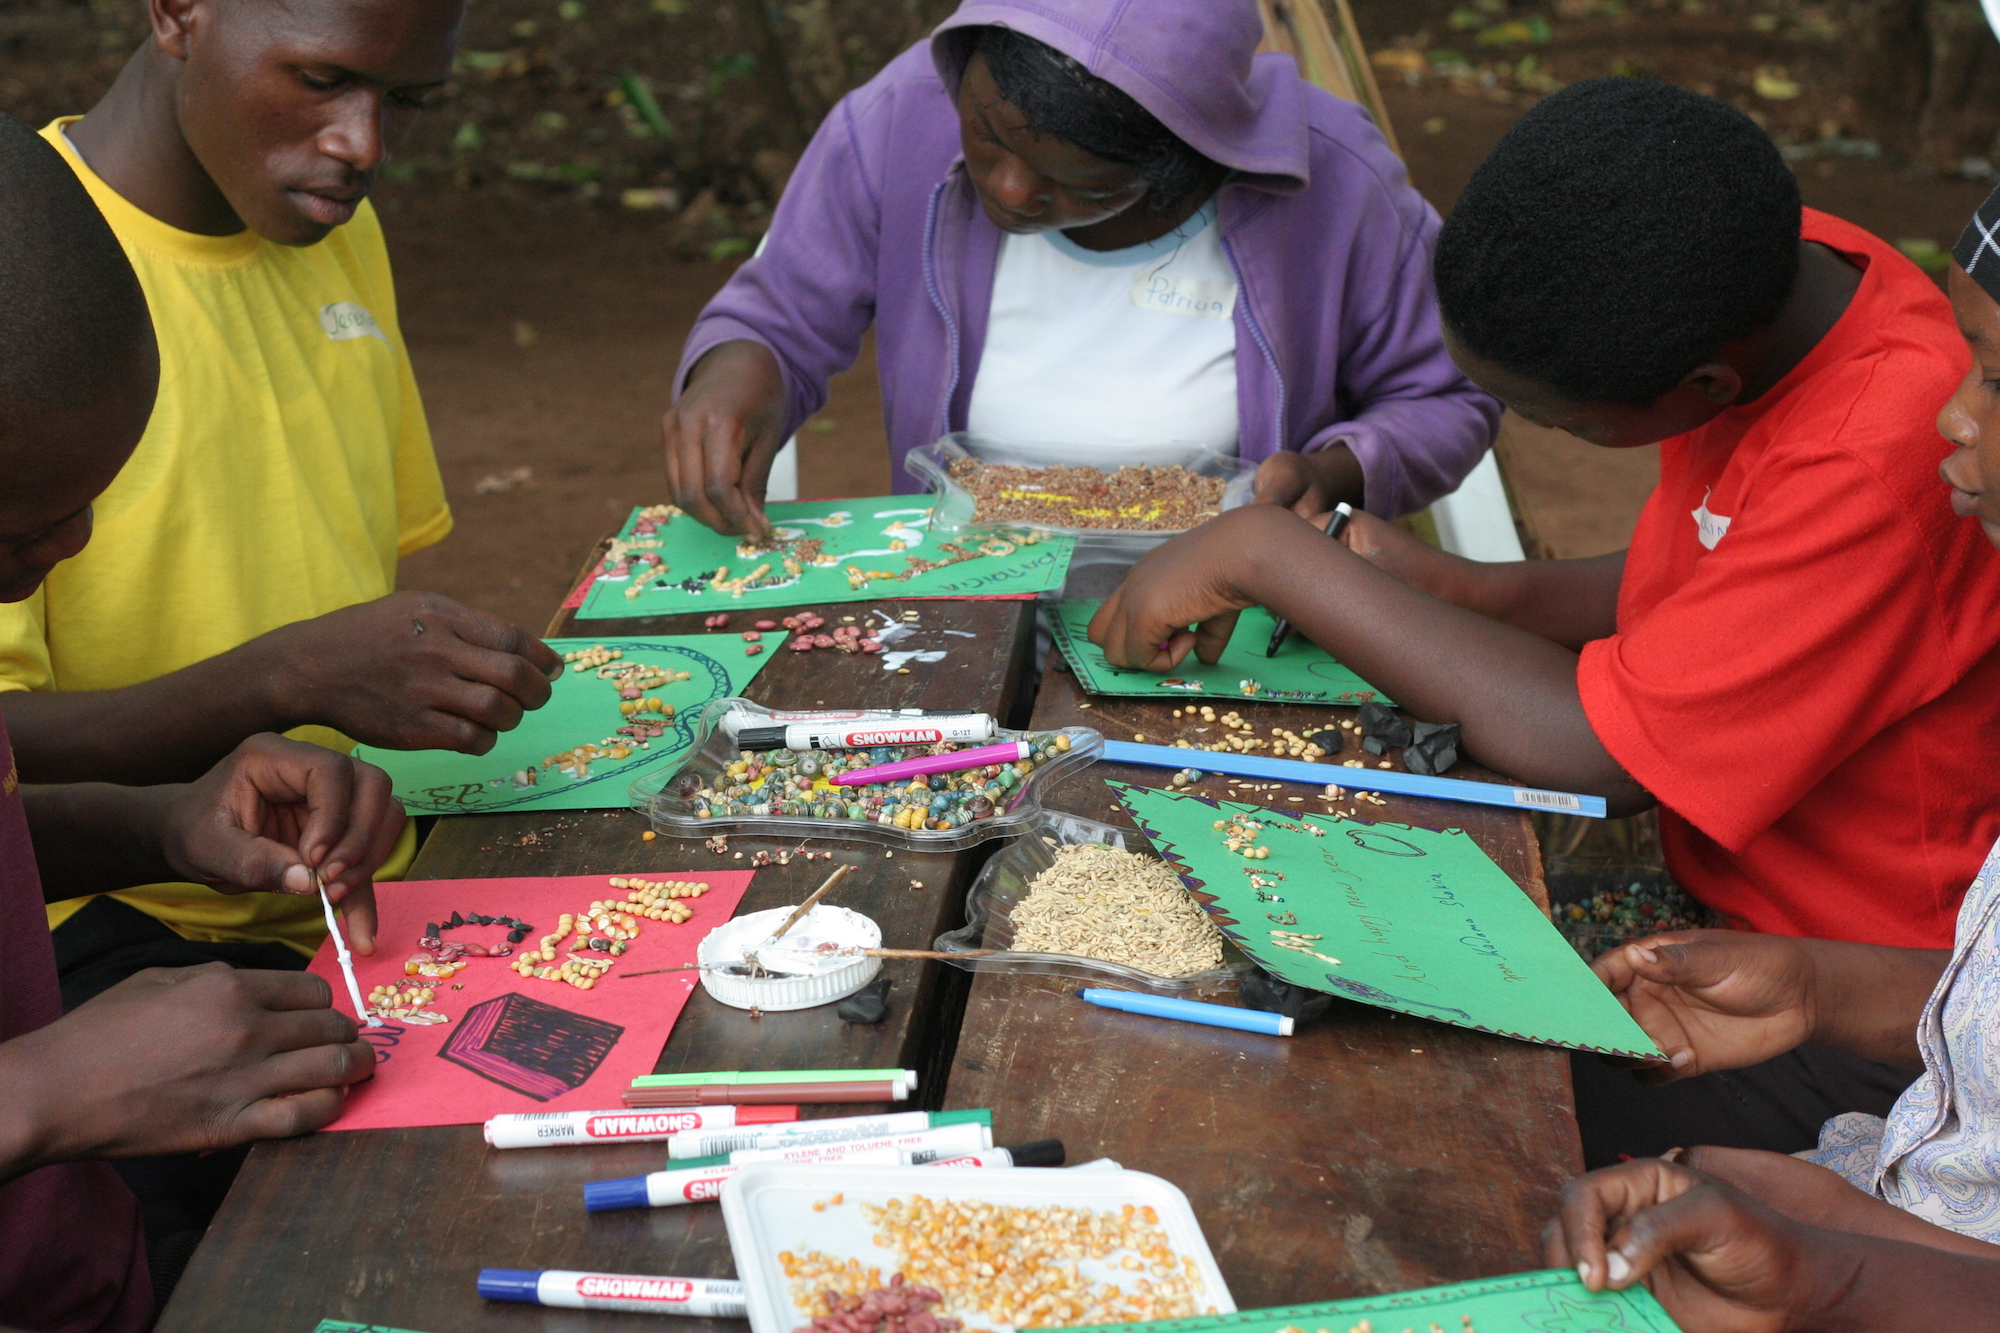 Young people at a table making Christmas cards